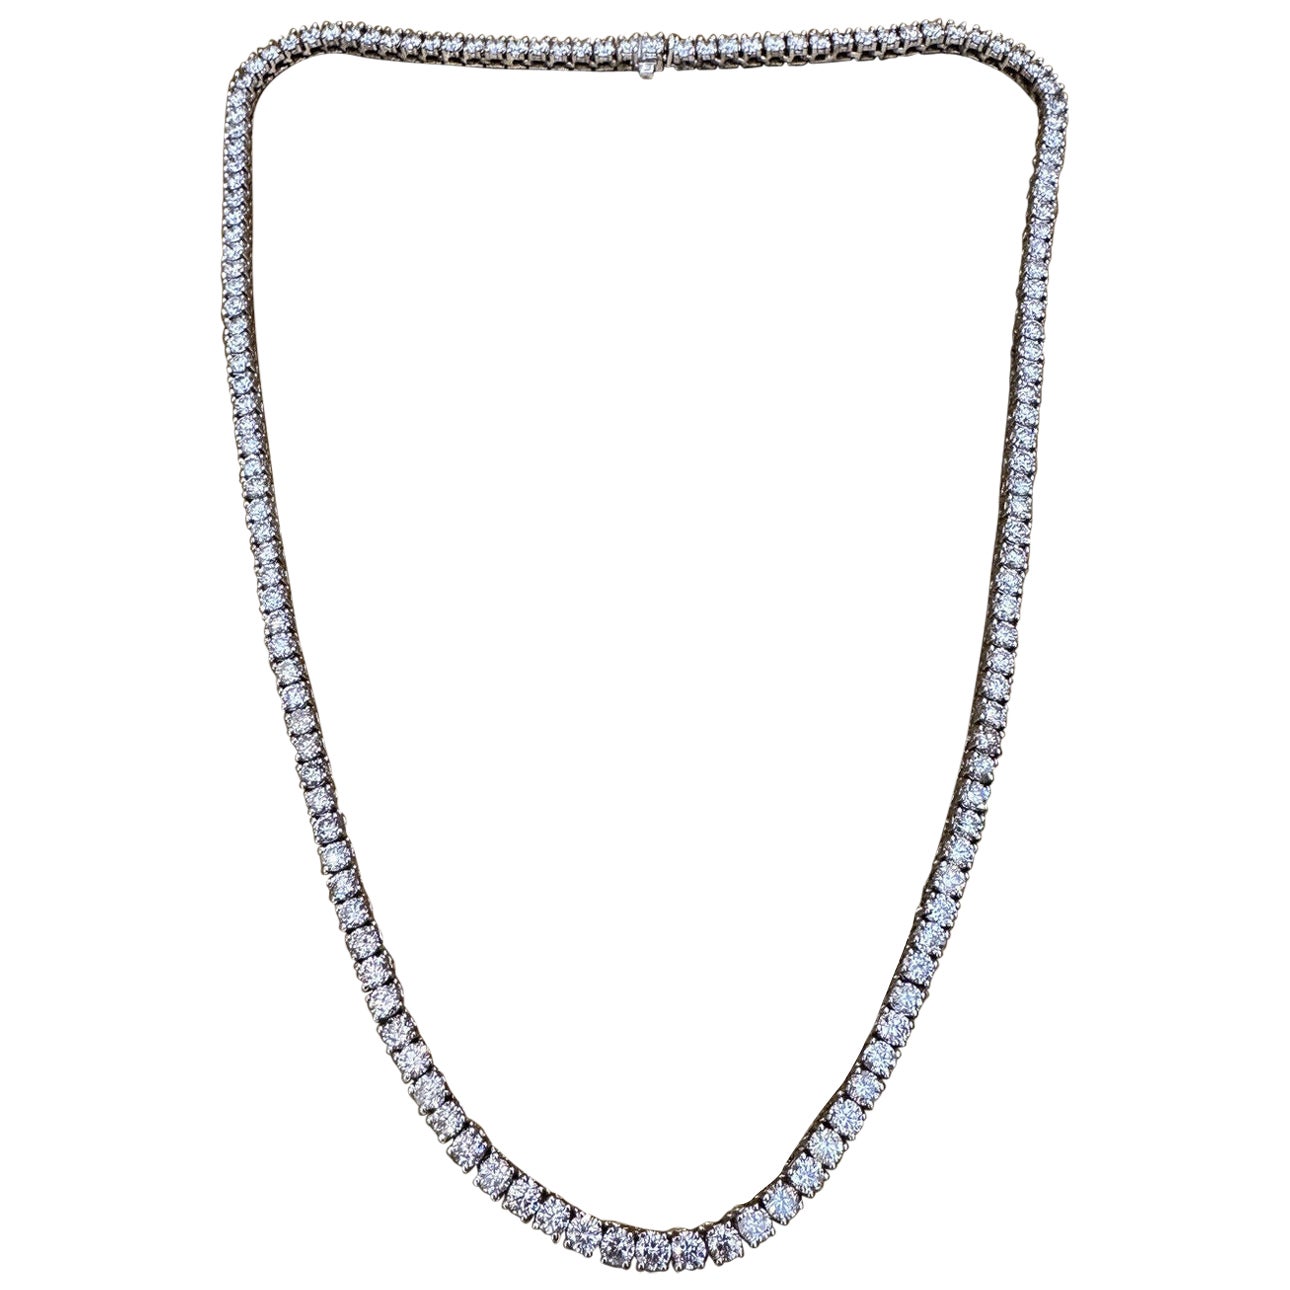 21.5" Long Diamond Tennis Riviera Necklace 24 Carats Total in 14k White Gold For Sale